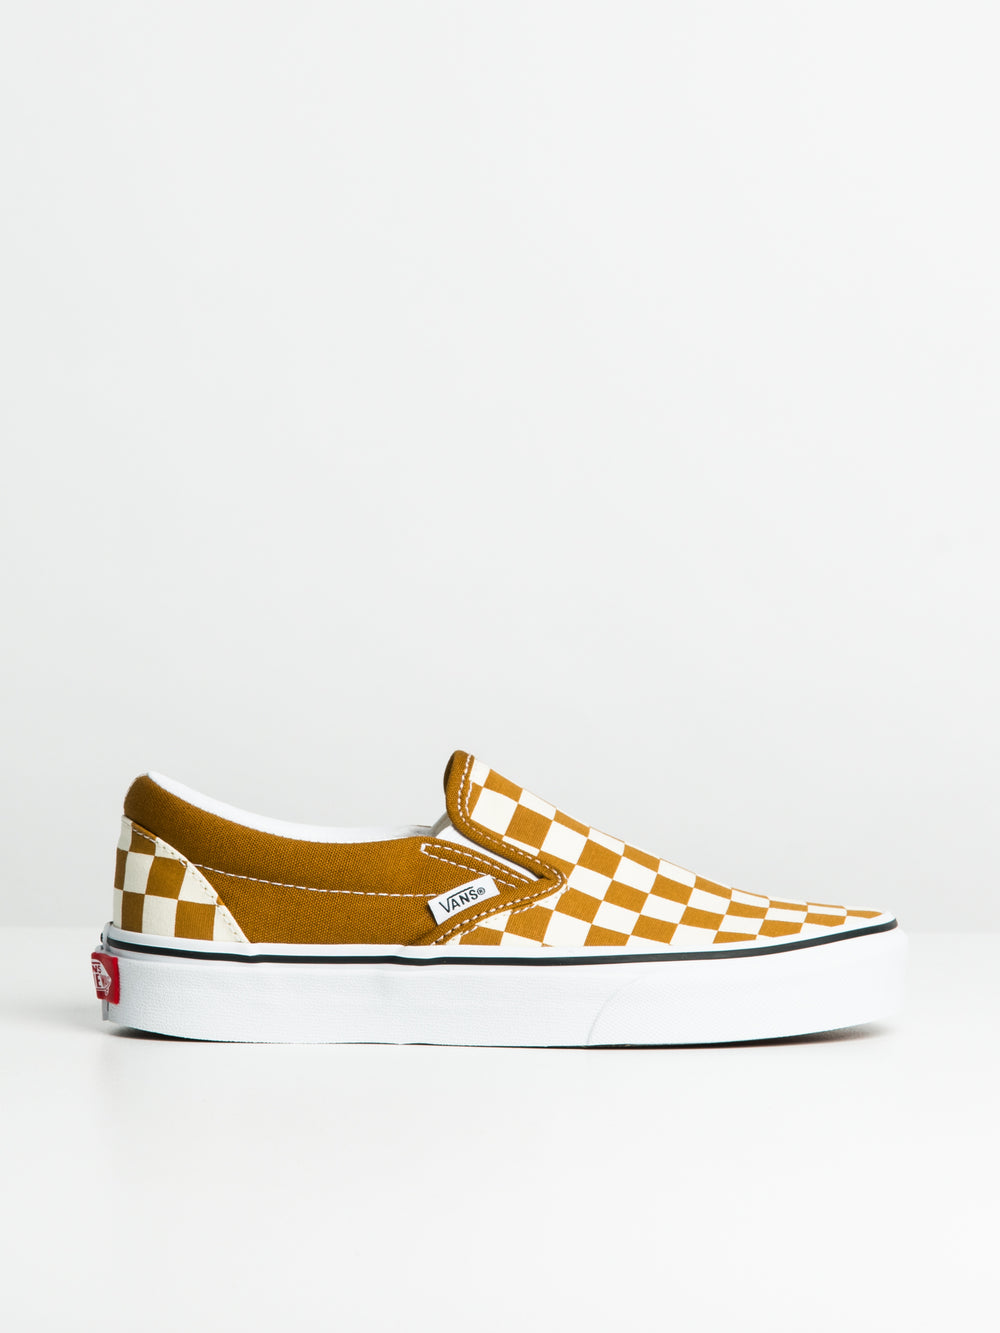 WOMENS VANS CL SLIP-ON CHECK - CLEARANCE